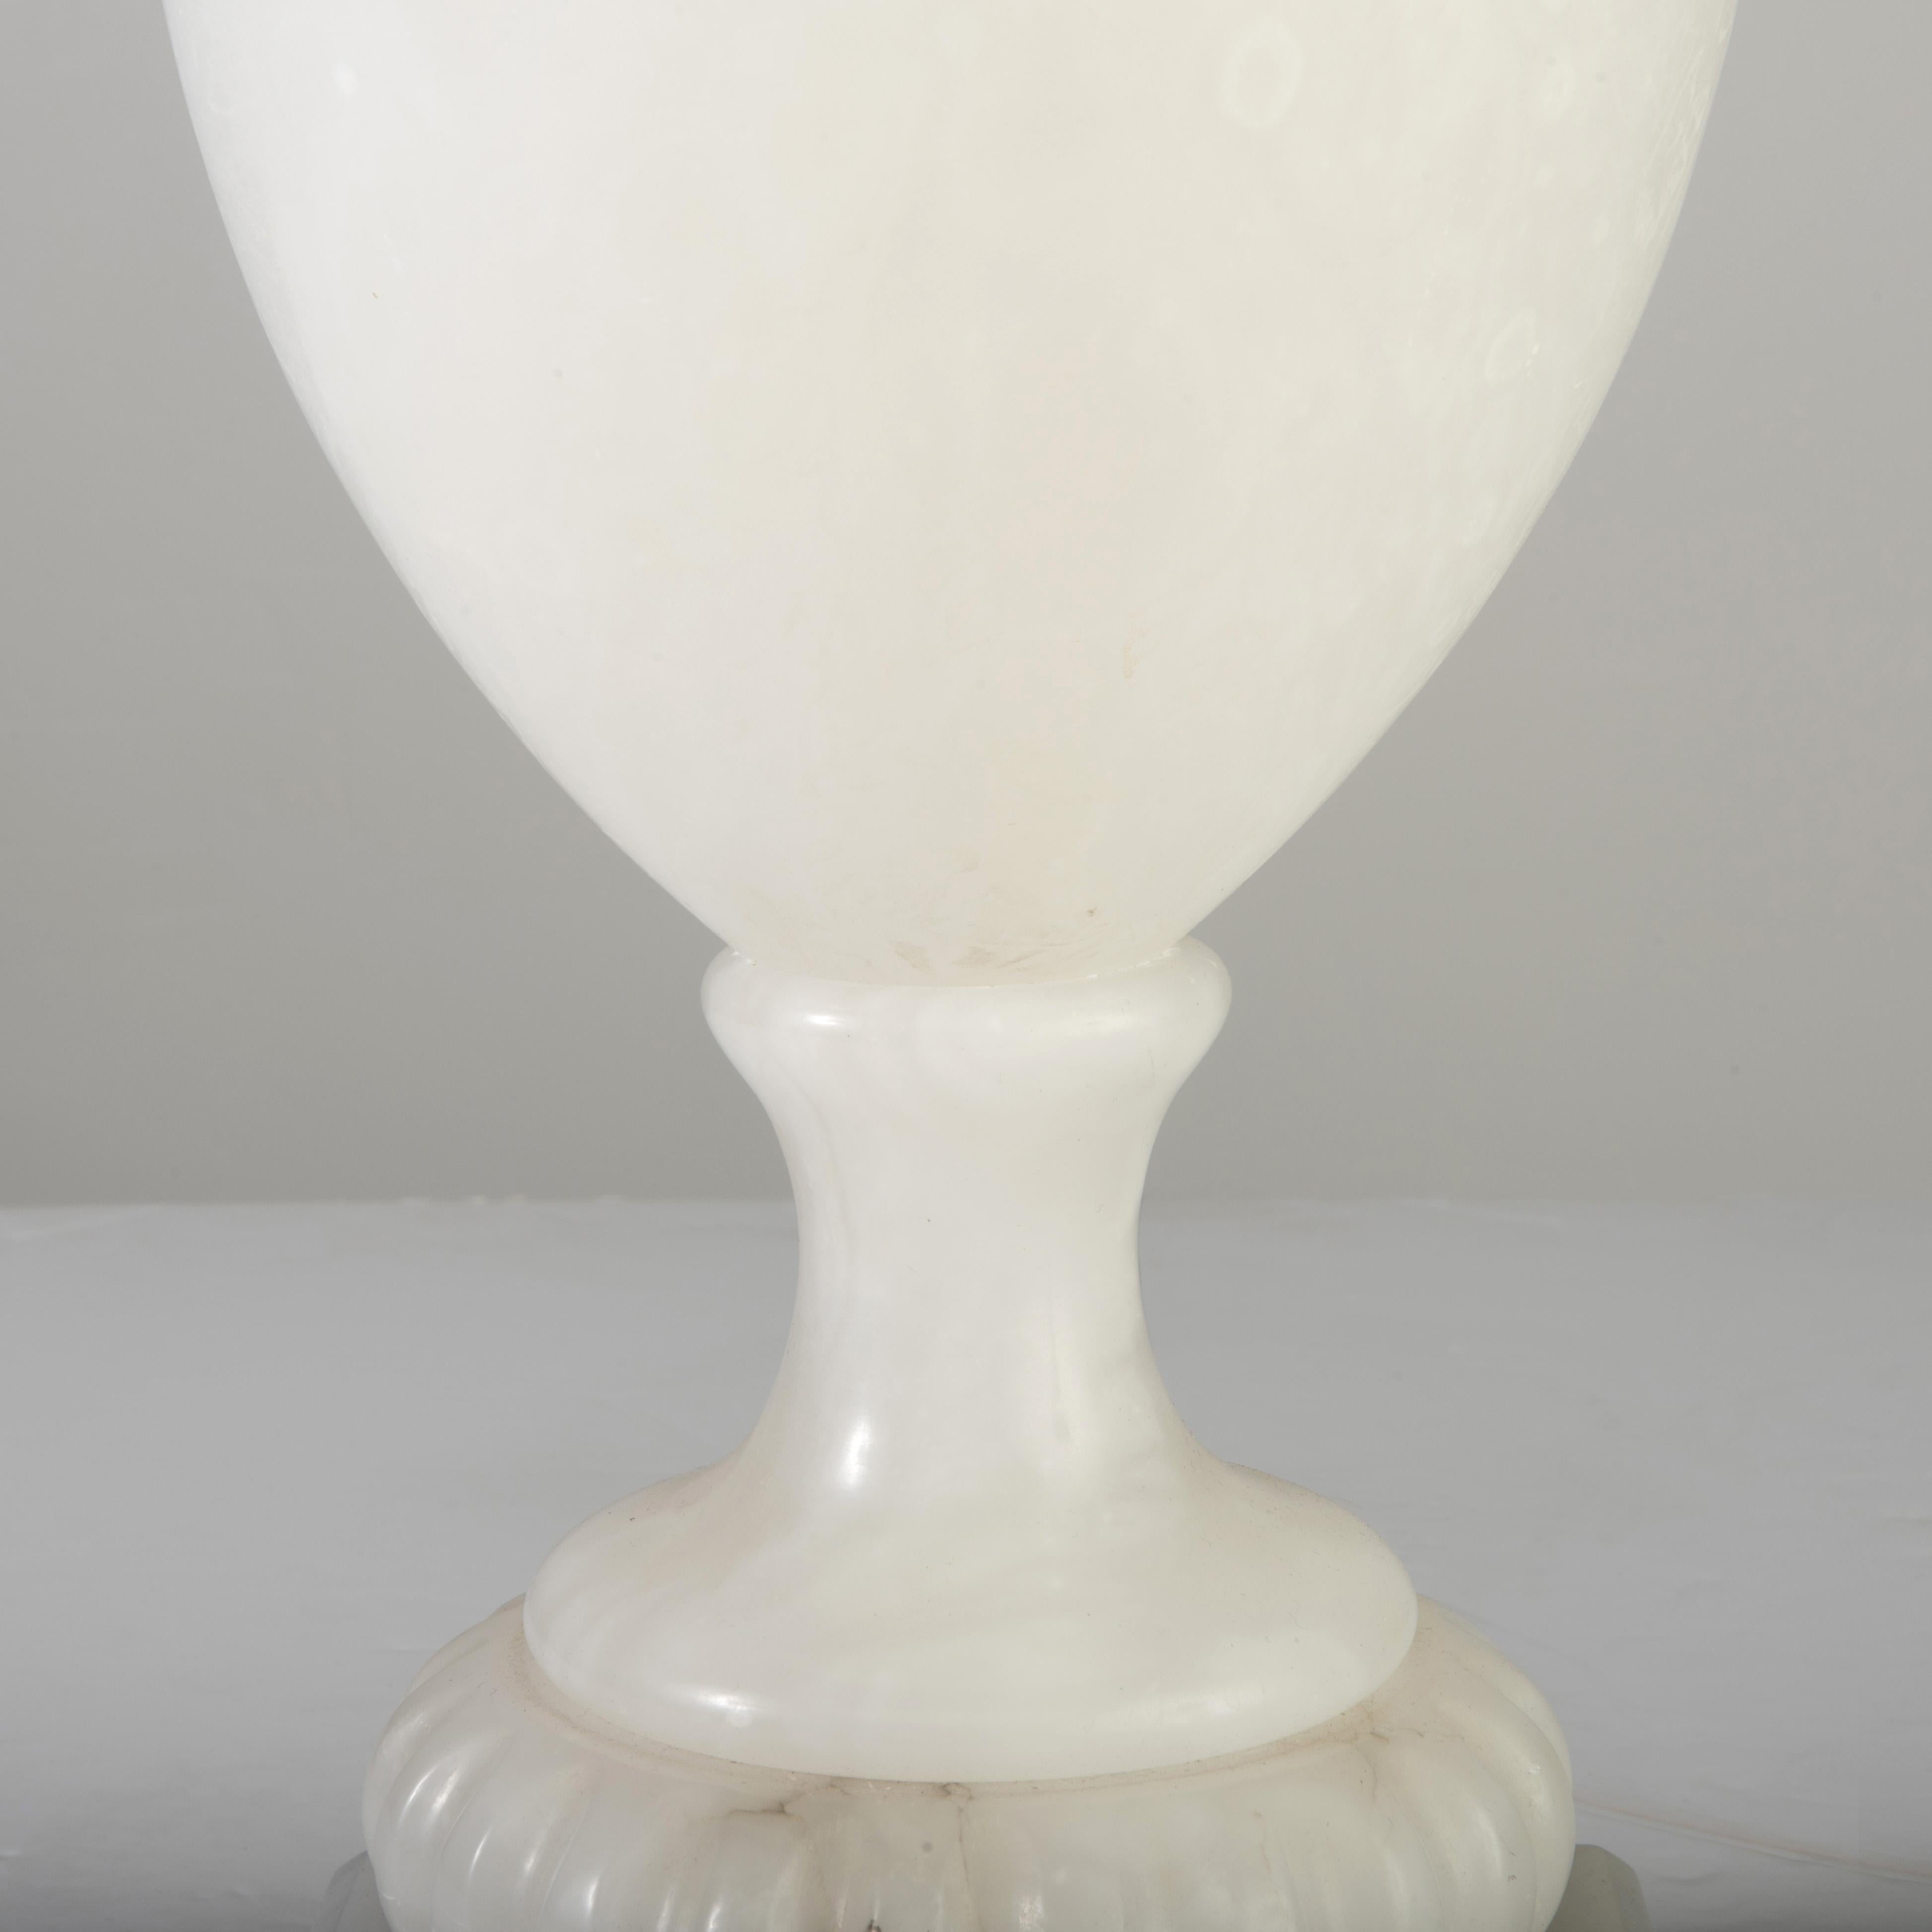 1950s Italian Neoclassical Alabaster Vase Urn Baluster Marbro Style Lamp For Sale 6